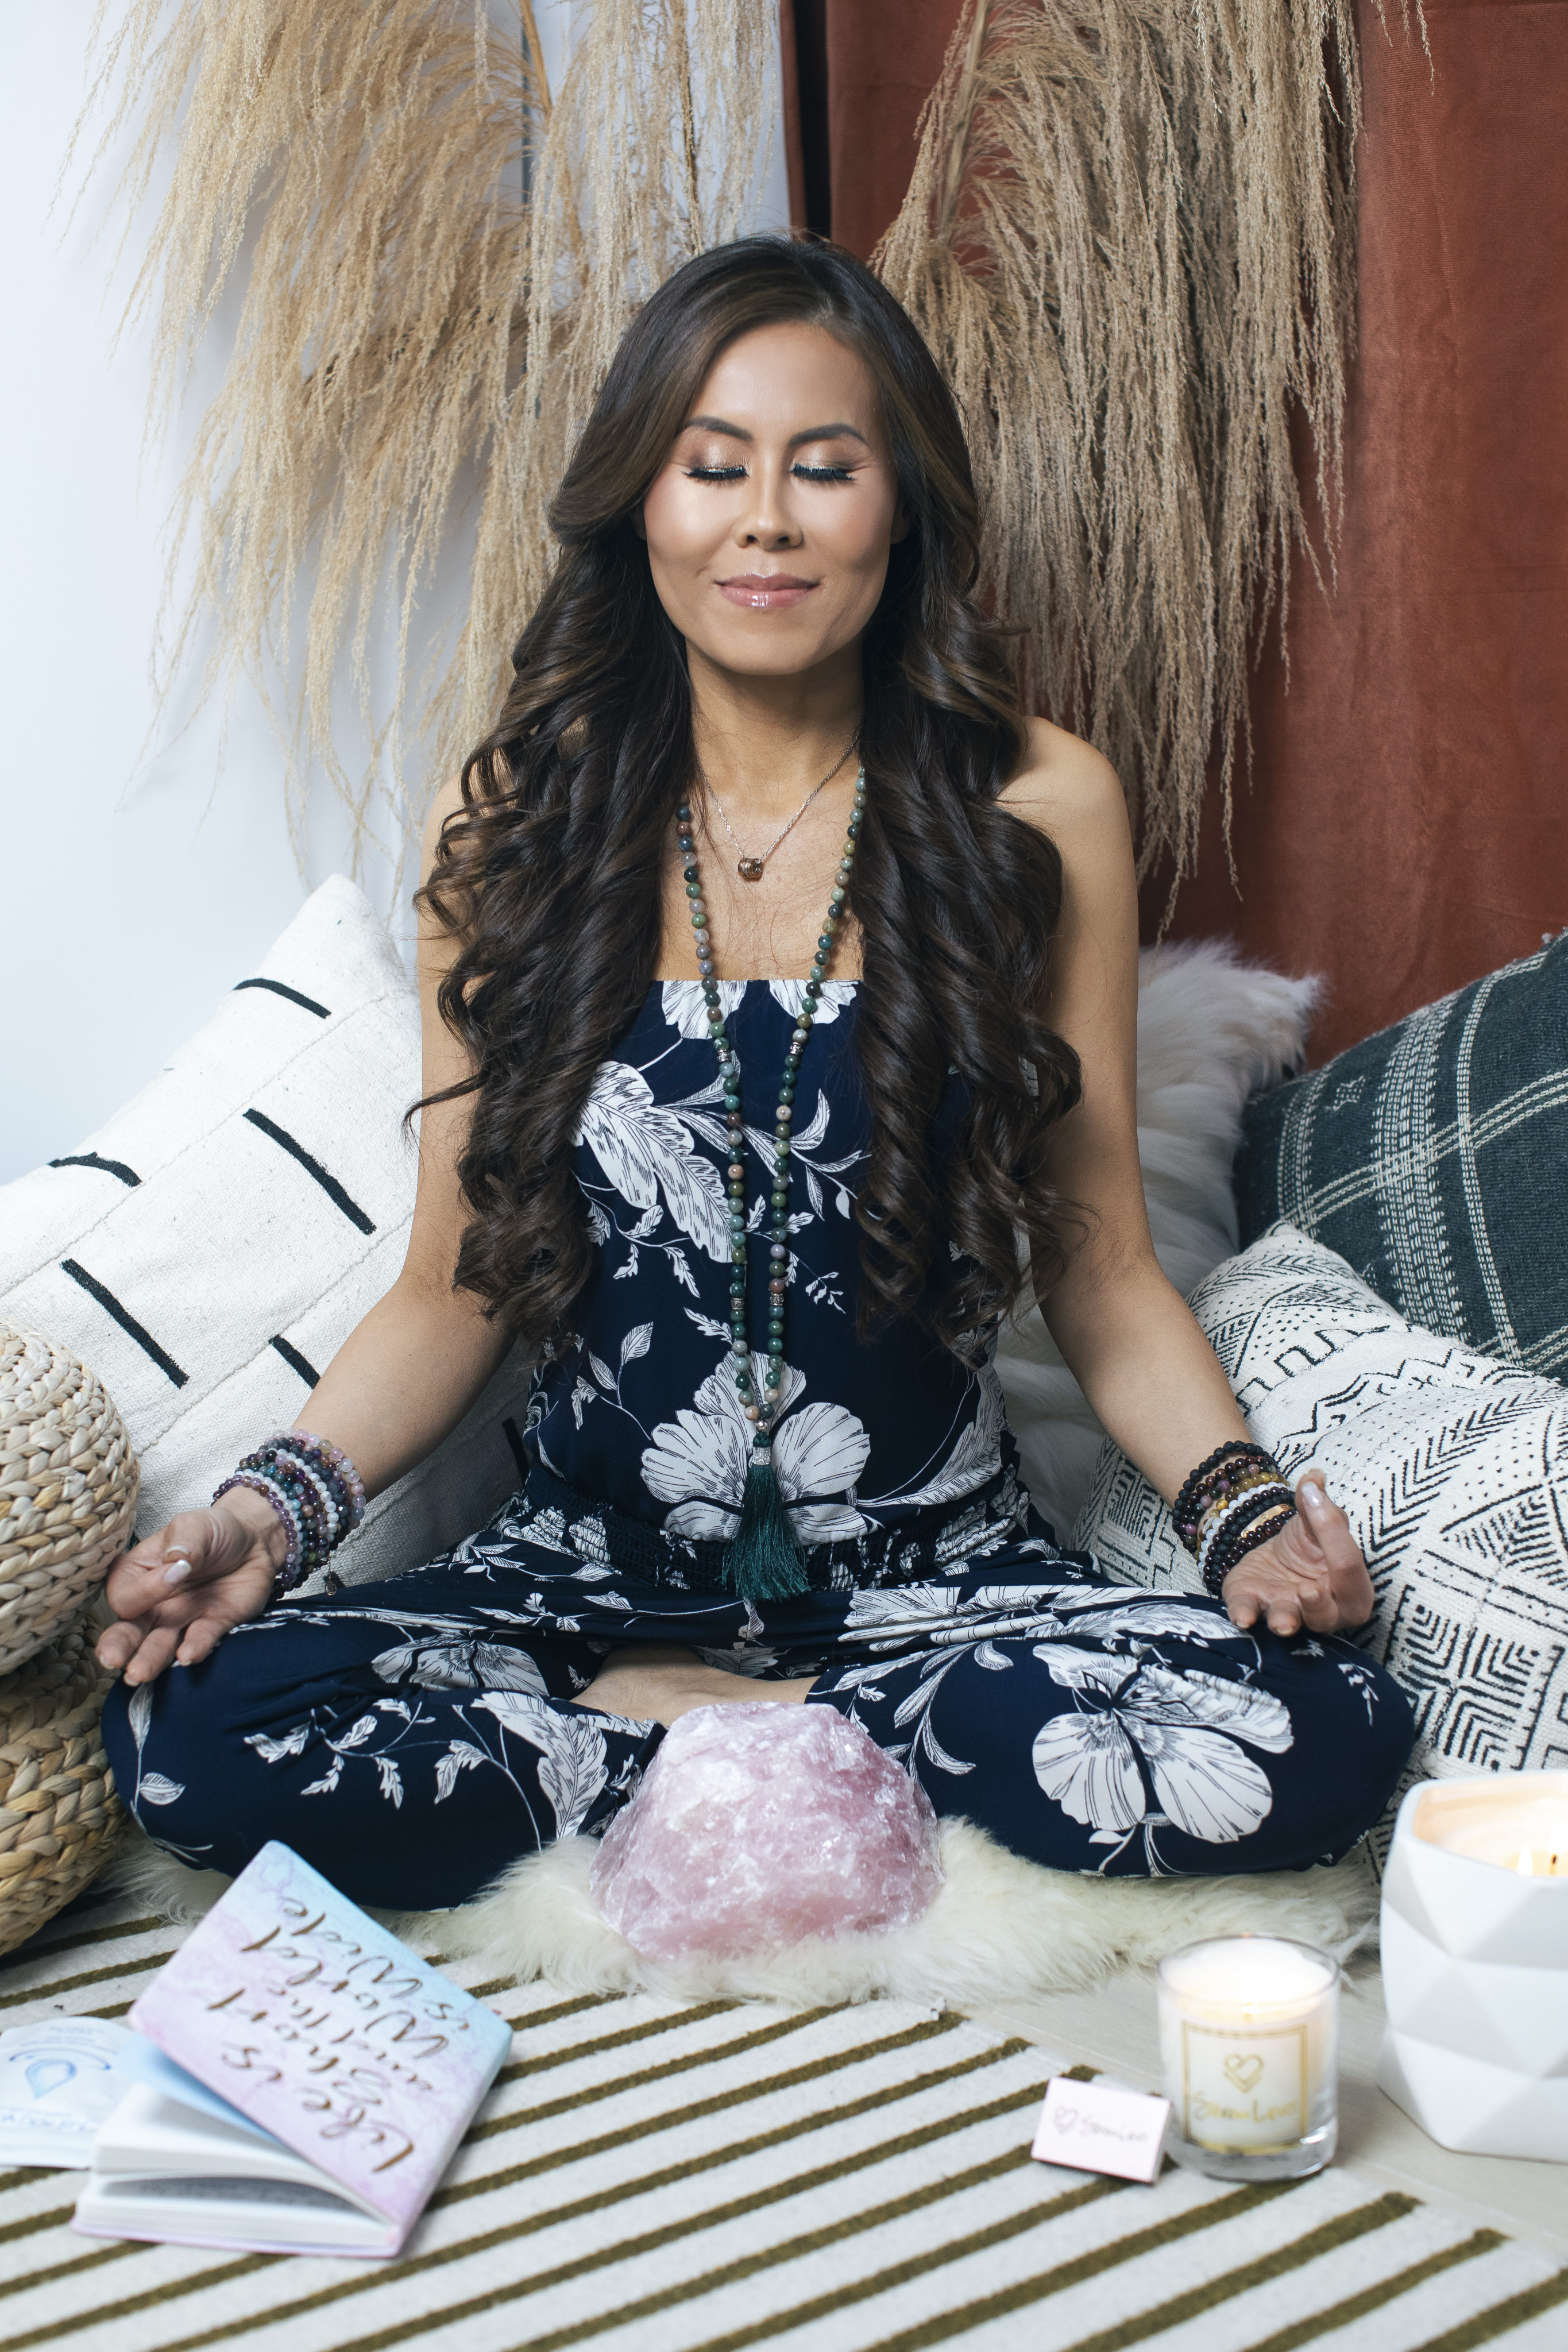 Serena Poon combines reiki, integrative nutrition and mindfulness in her holistic health treatments. Photo: Milla Kuhto